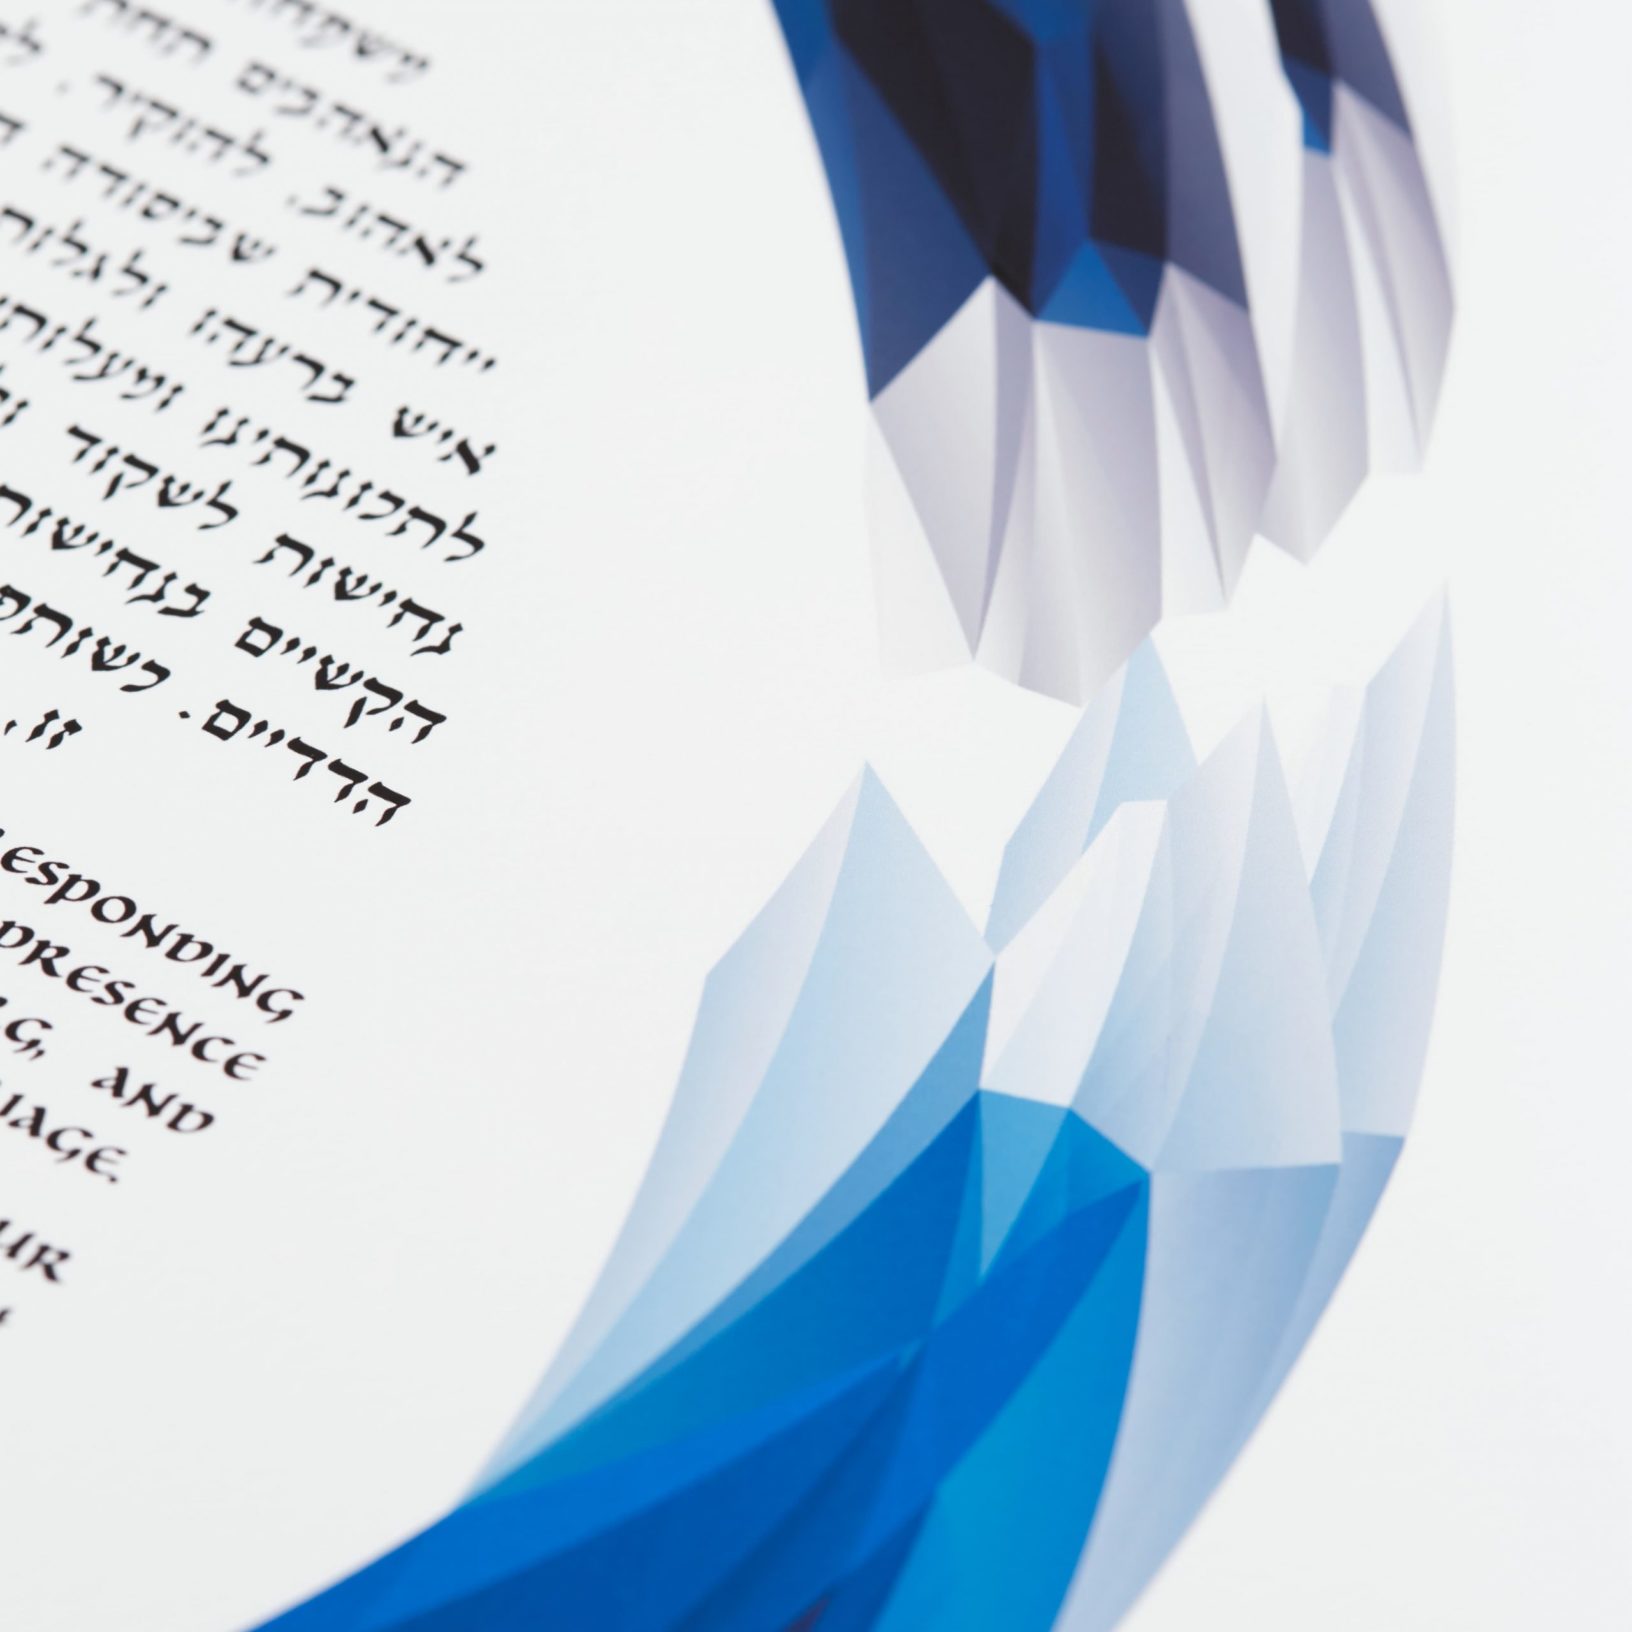 Spectrum Ketubah Marriage Contracts by Ruth Mergi